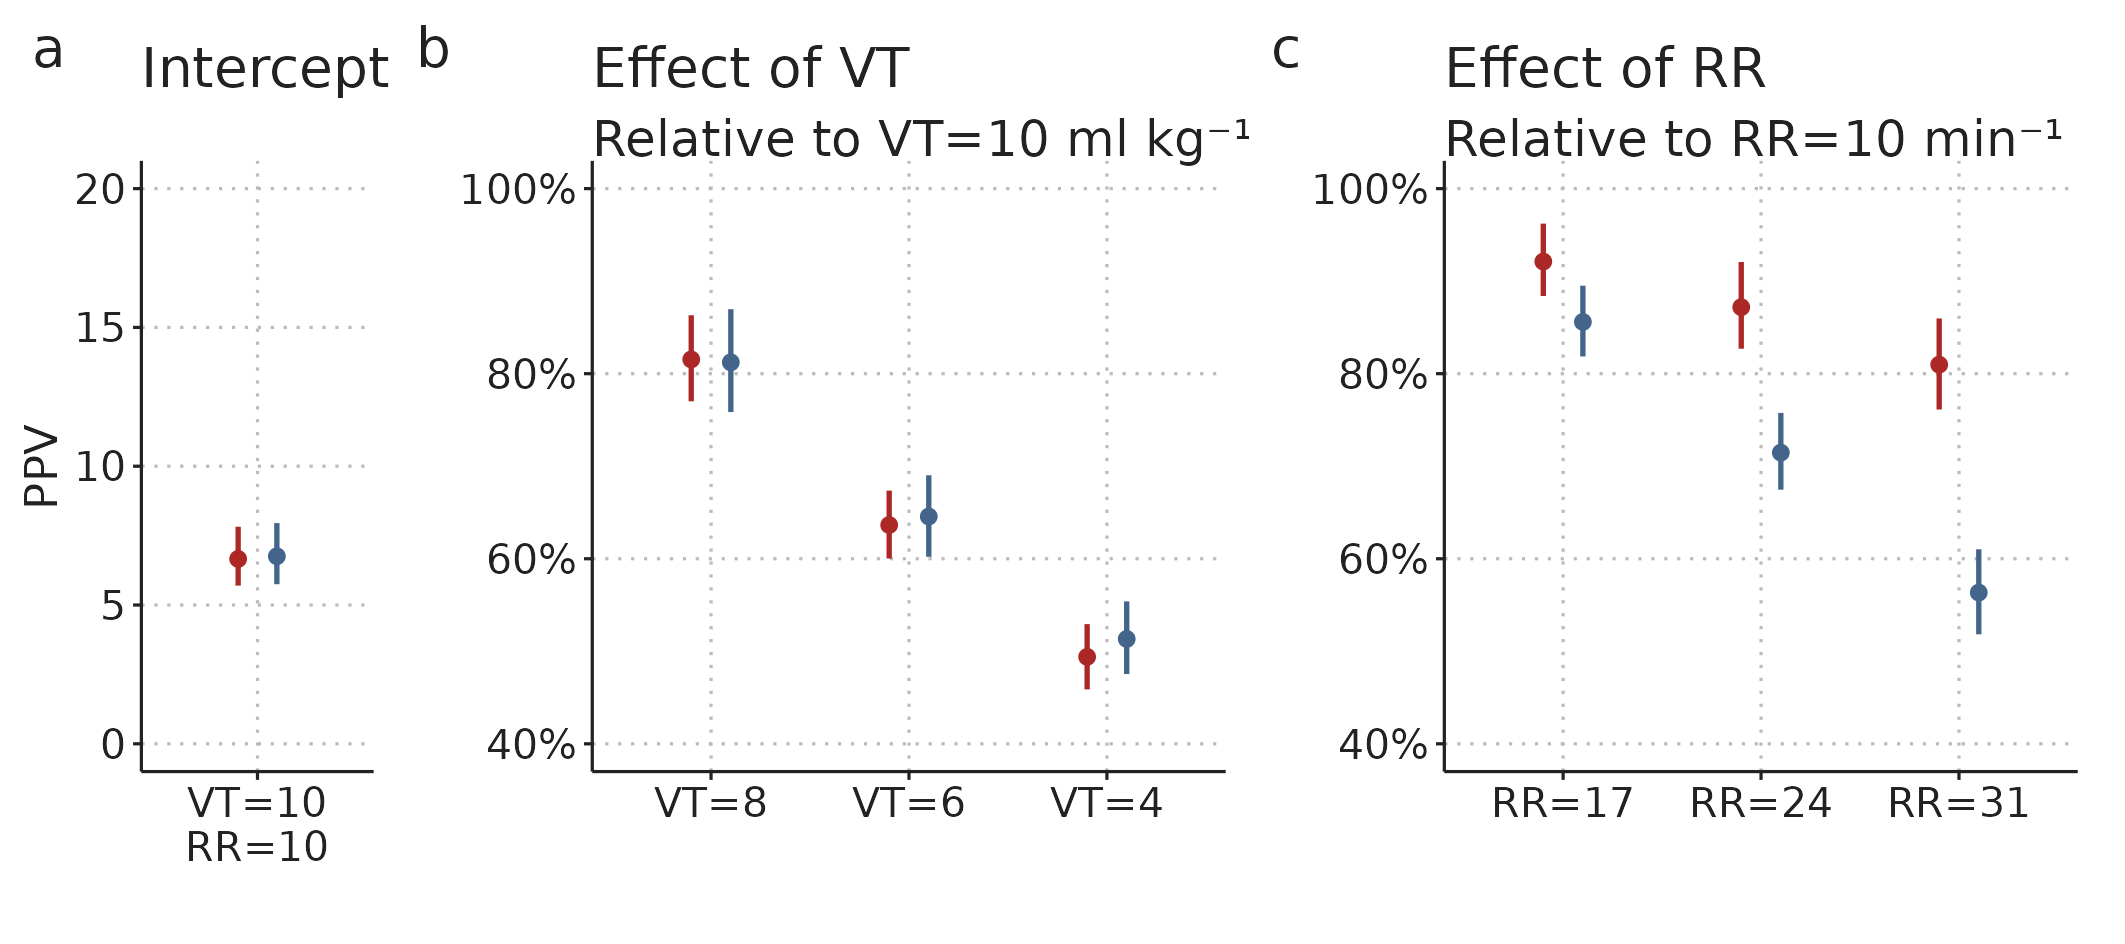 Posterior distributions (estimate and 95%CI) for parameters of the Bayesian mixed model fitted to PPV values for different ventilator settings. The intercept is the median PPV at RR=10 min-1, \(V_T\)=10 ml kg-1 across subjects. The effects of RR and \(V_T\) are multiplied to give the expected relative differences between the PPV at RR=10 min-1, \(V_T\)=10 ml kg-1 and the PPV at other ventilator settings within a single subject.